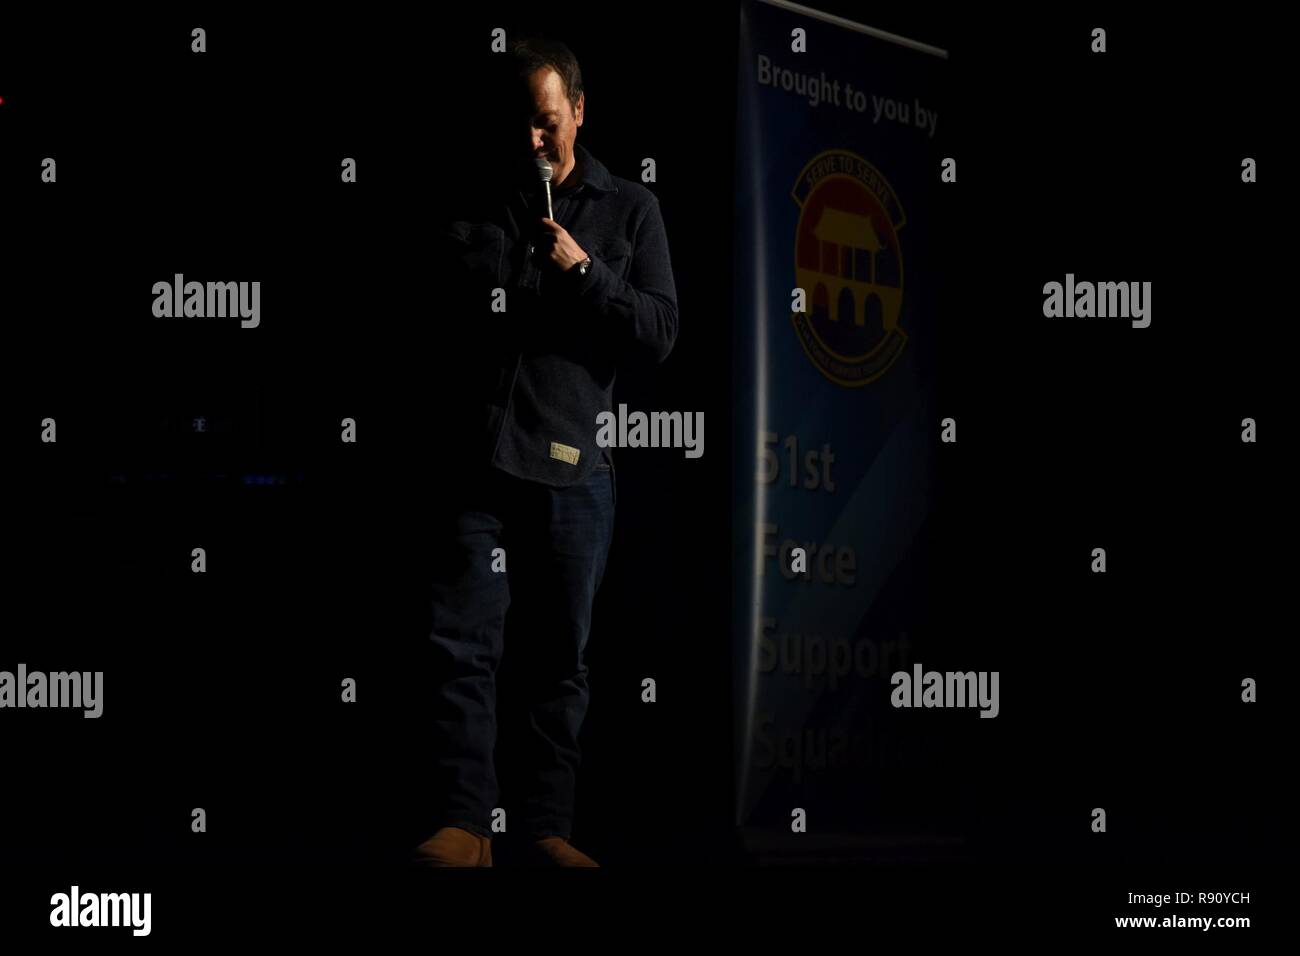 Rob Schneider, comedian and actor, performs stand-up comedy in the Enlisted Club at Osan Air Base, Republic of Korea, Dec. 9, 2018. Schneider is known for his roles in movies such as The Hot Chick, The Animal, 50 First Dates, The Waterboy and his most recent Netflix show, Real Rob. Stock Photo